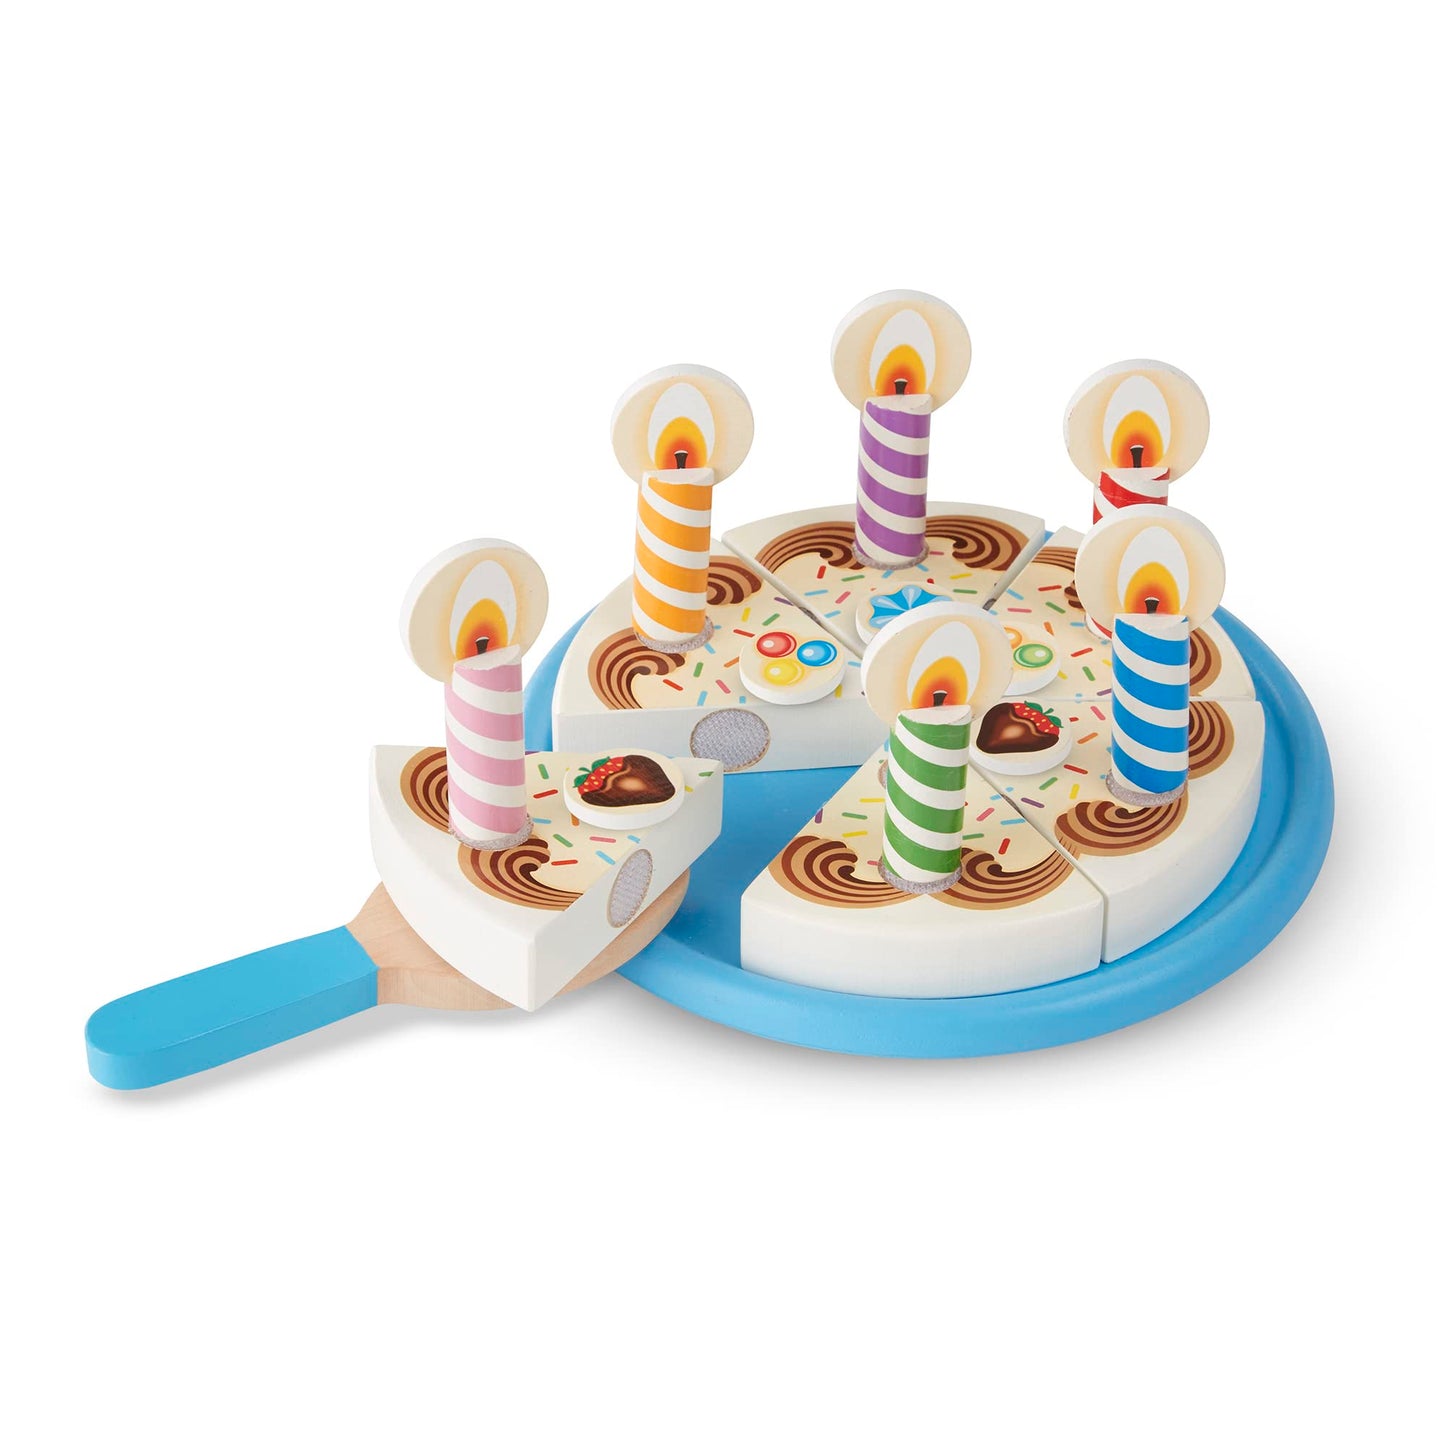 Melissa & Doug Birthday Party Cake - Wooden Play Food With Mix-n-Match Toppings and 7 Candles